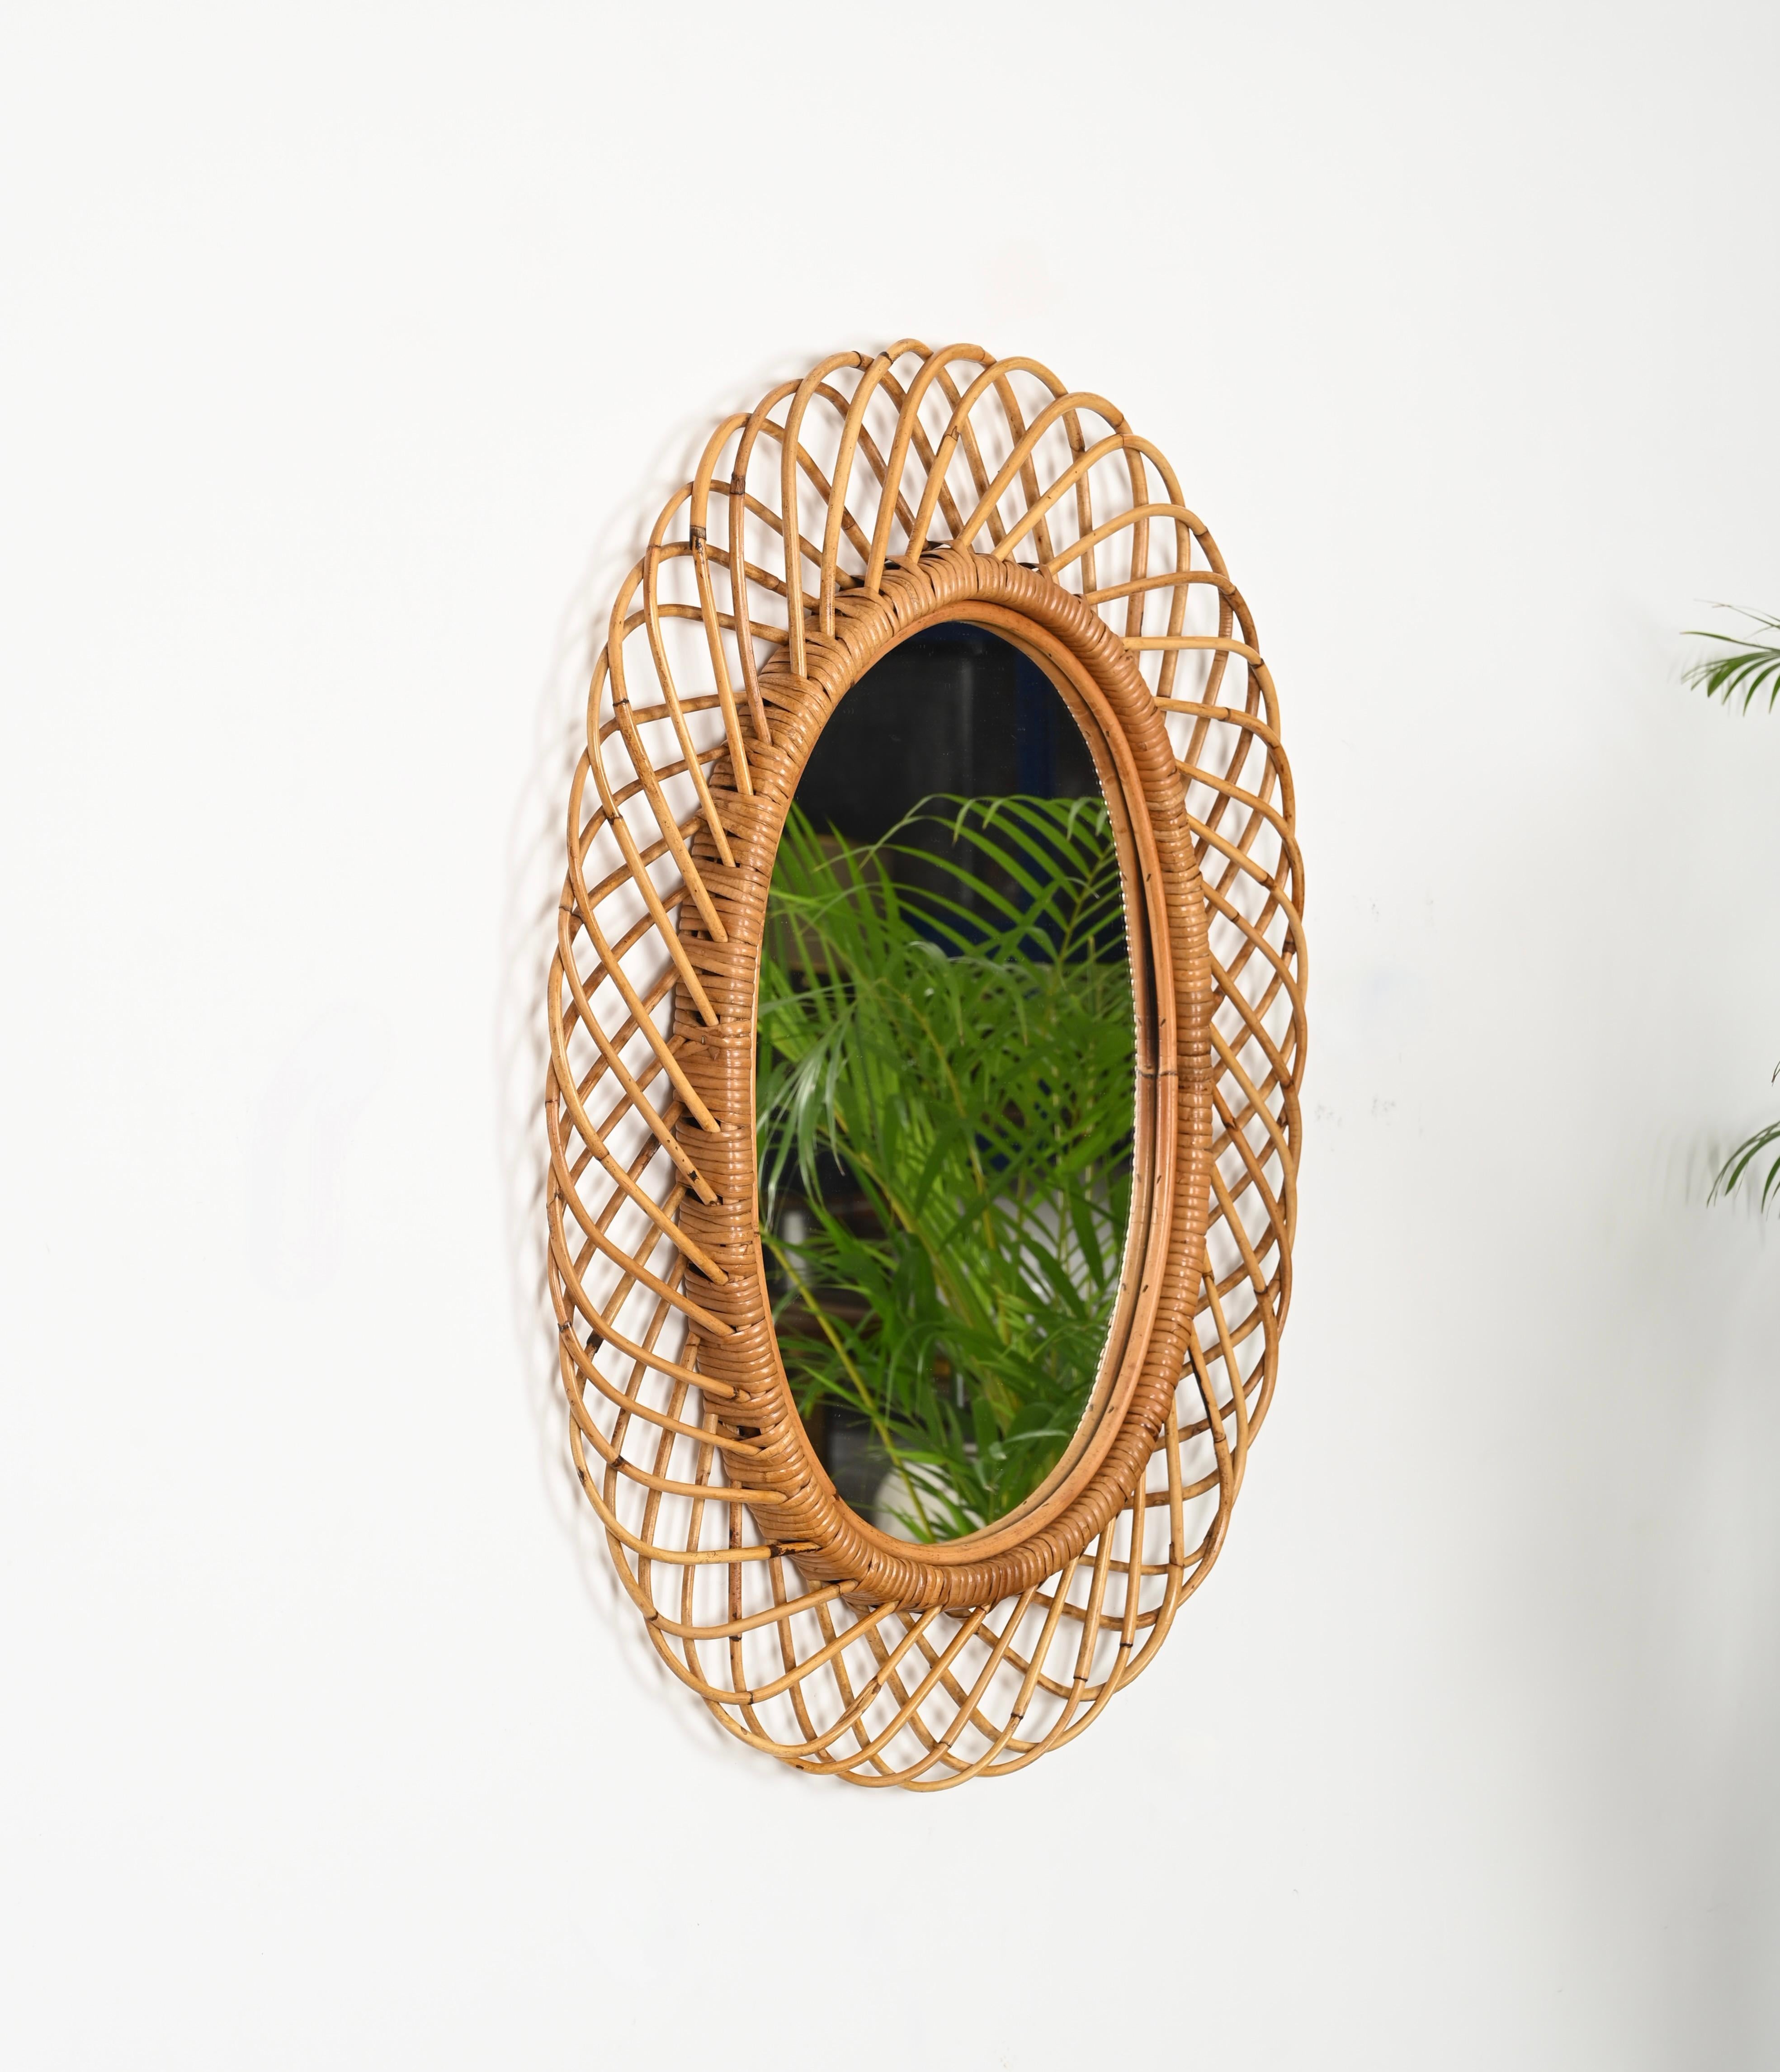 Italian Franco Albini French Riviera Rattan and Bamboo Oval Mirror, Italy 1960s For Sale